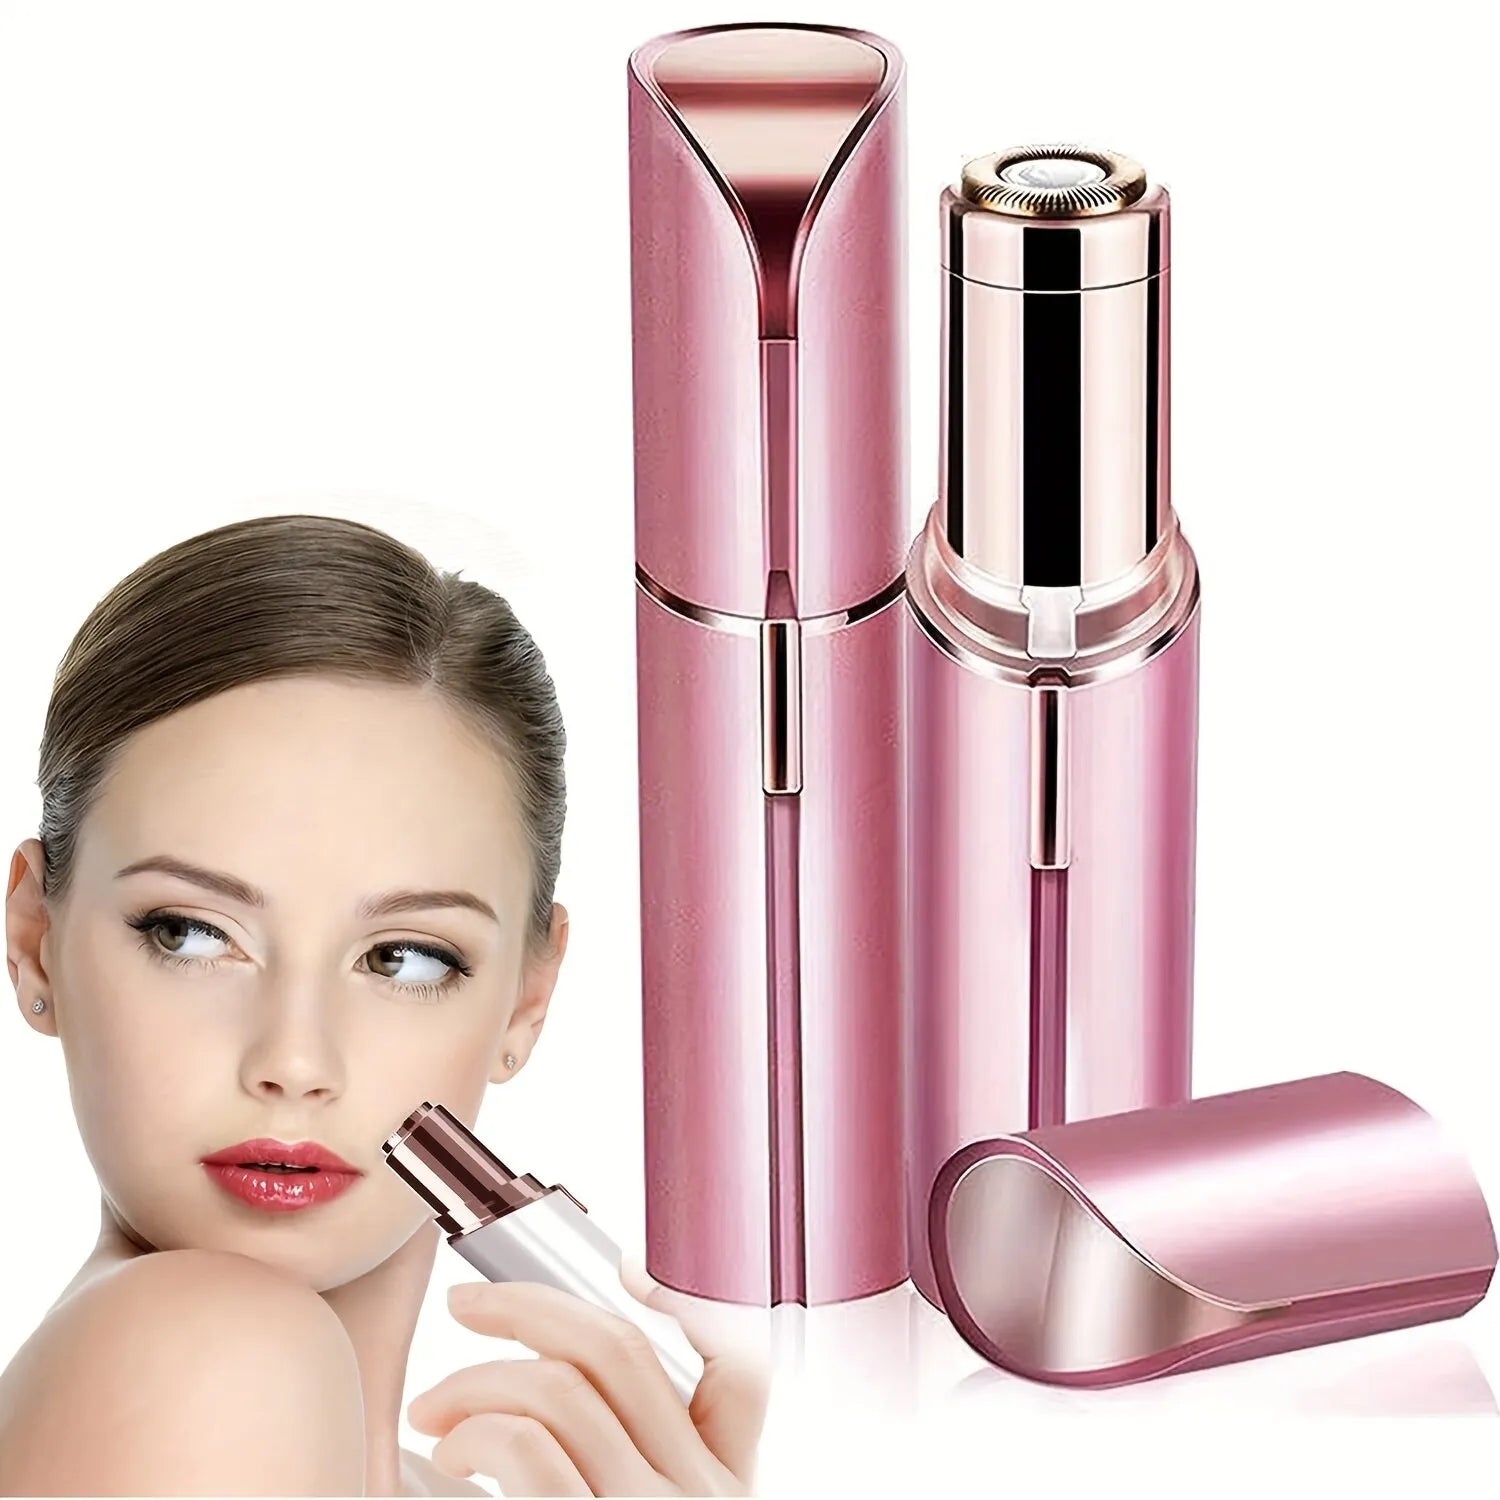 Portable Lipstick Electric Hair Remover: Painless Facial Hair Removal Solution  petlums.com   